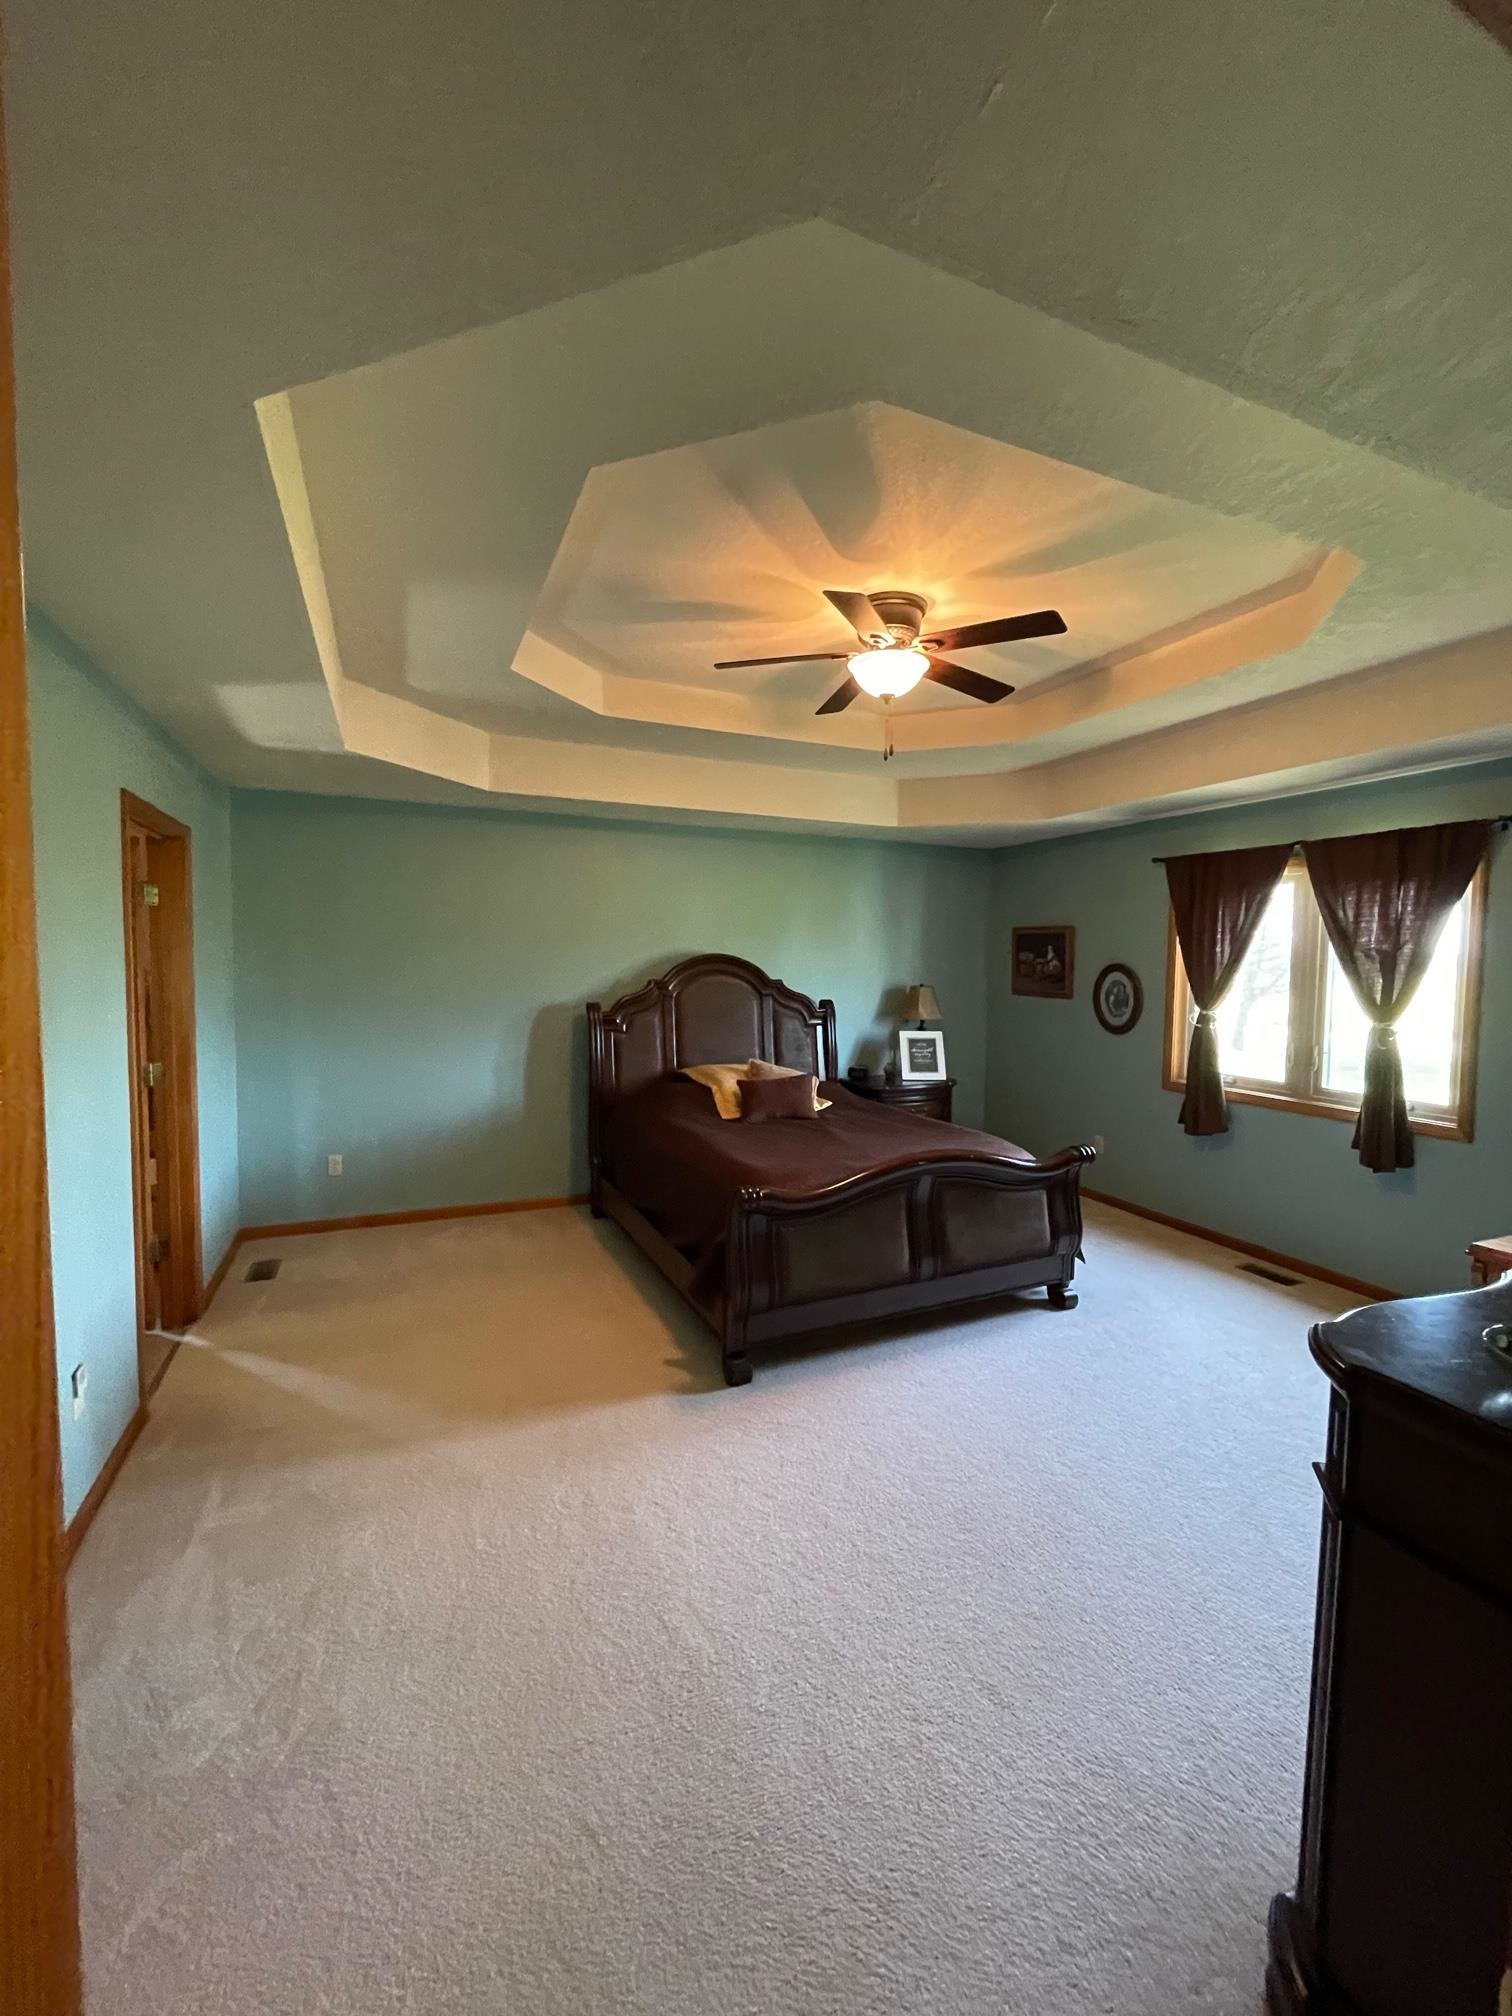 Huge master bedroom with exquisite tray ceilings